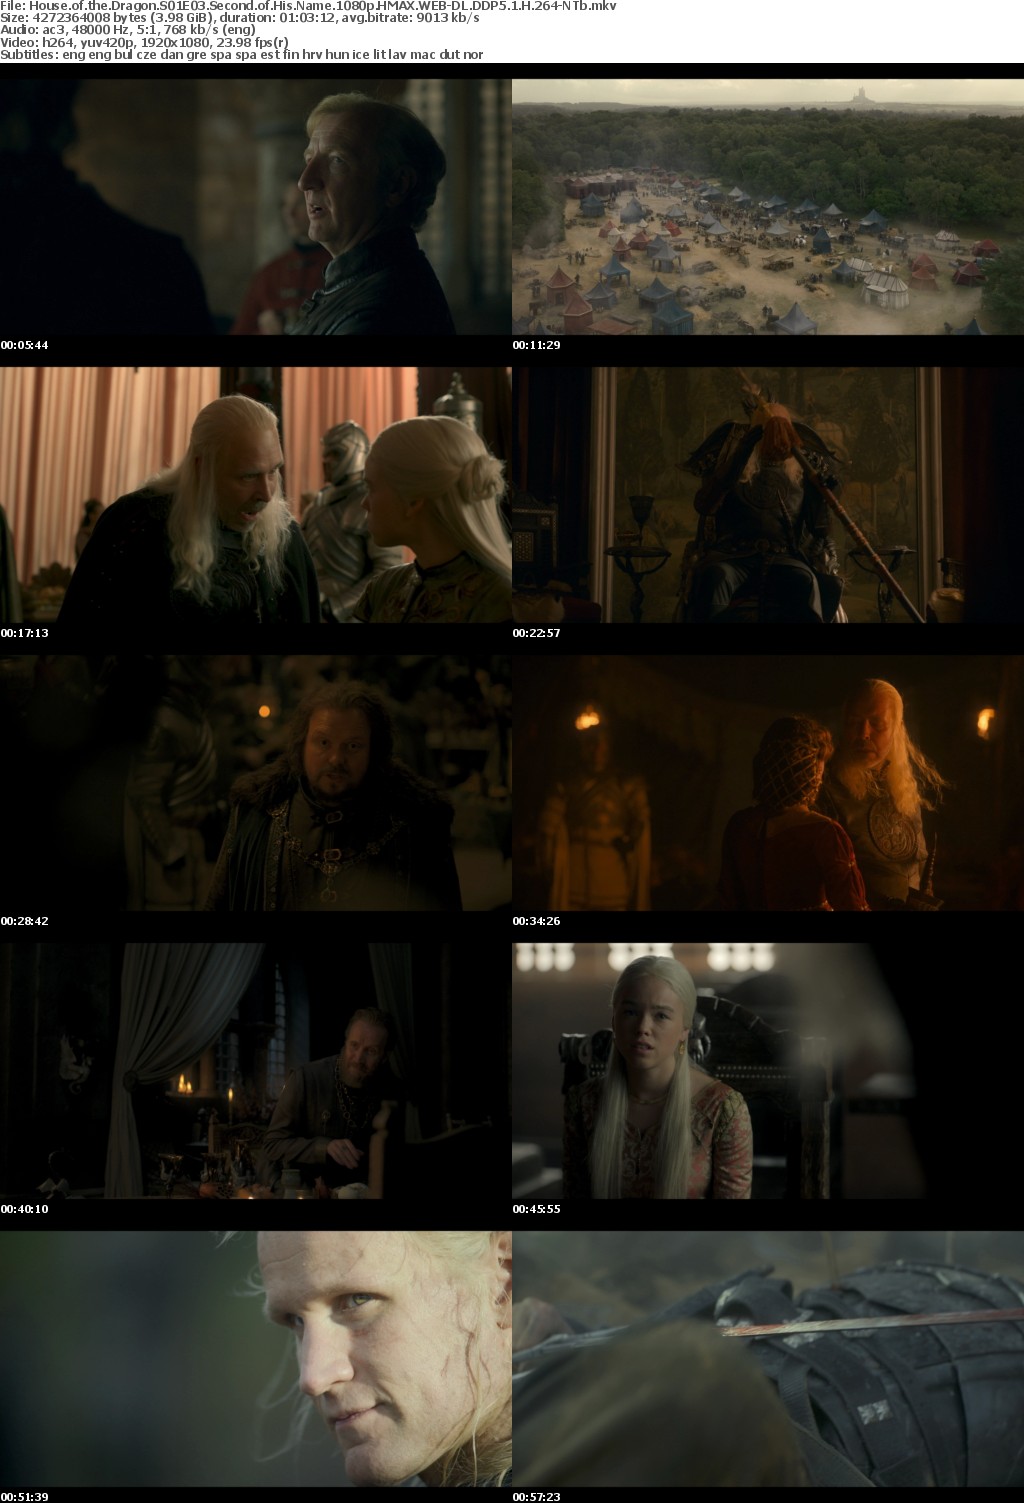 House of the Dragon S01E03 Second of His Name 1080p HMAX WEBRip DDP5 1 x264-NTb